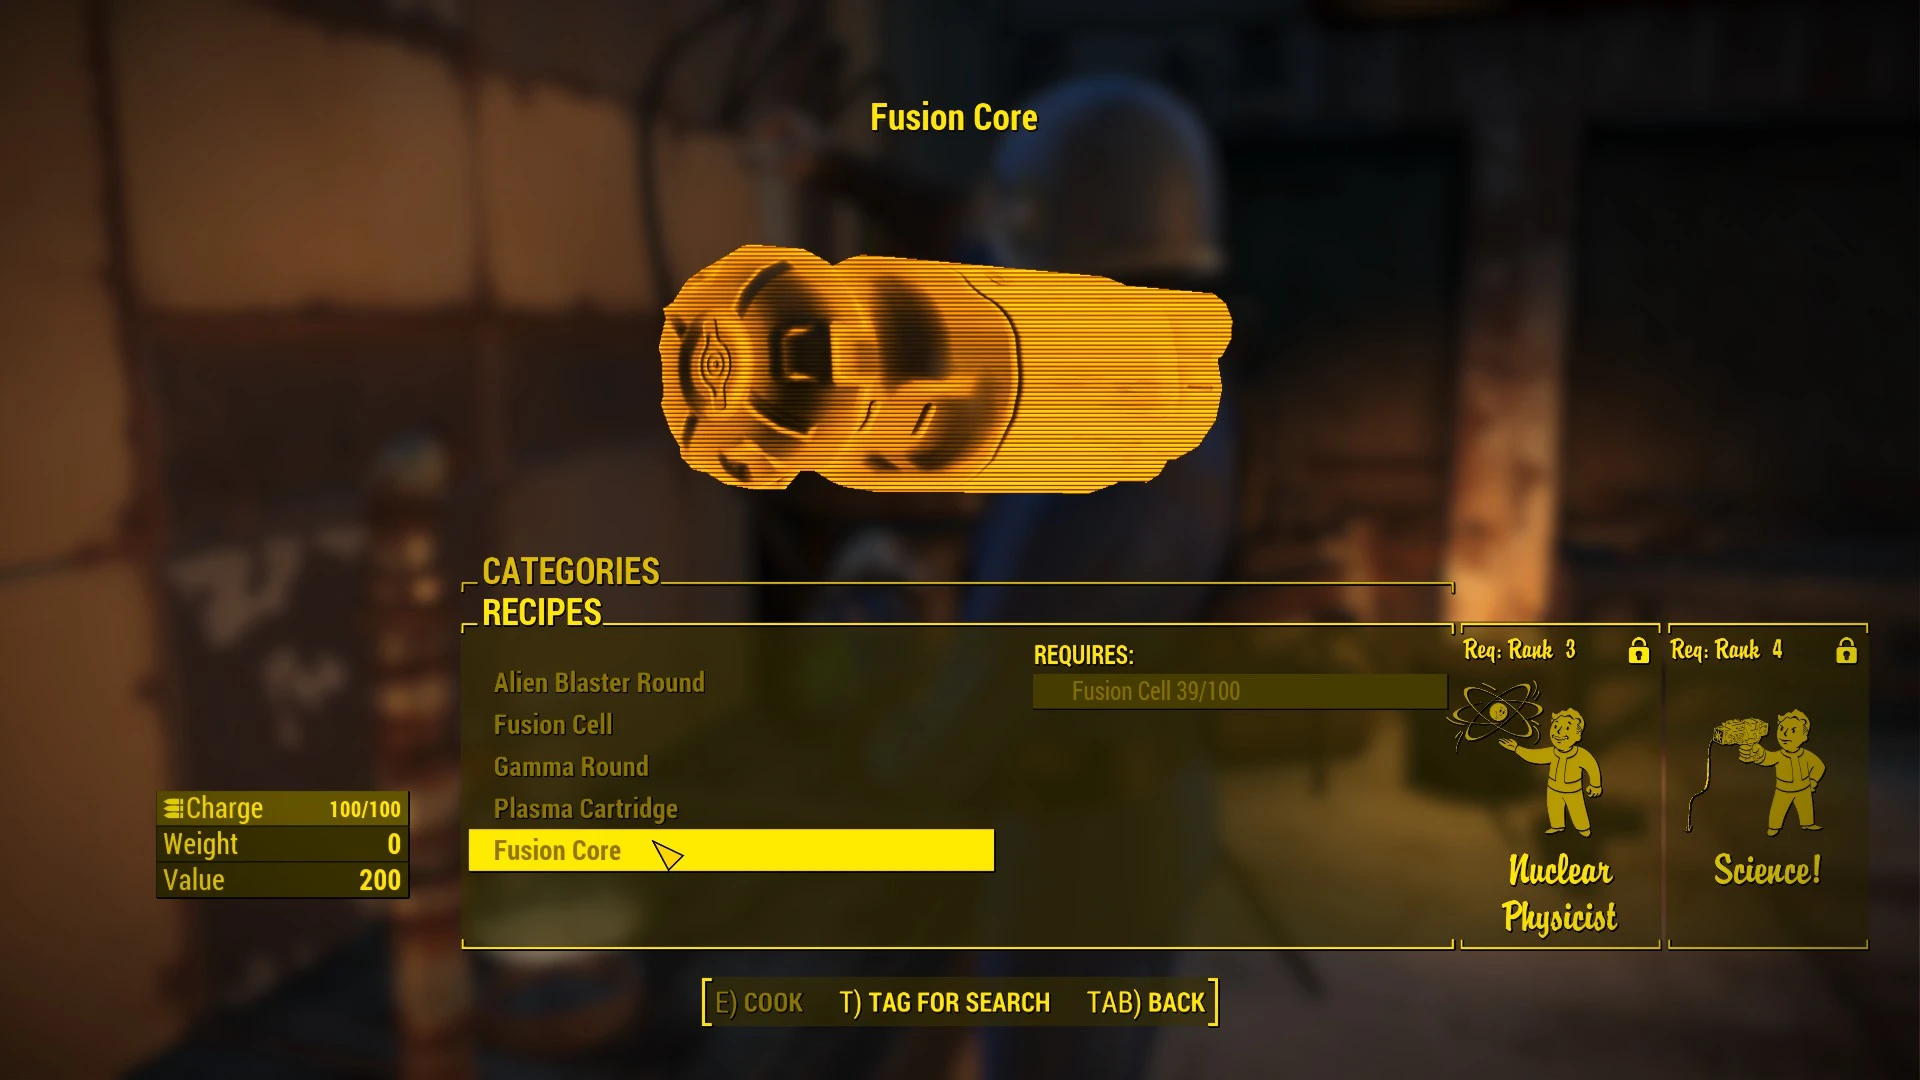 where to find 5.7 ammo in fallout 4